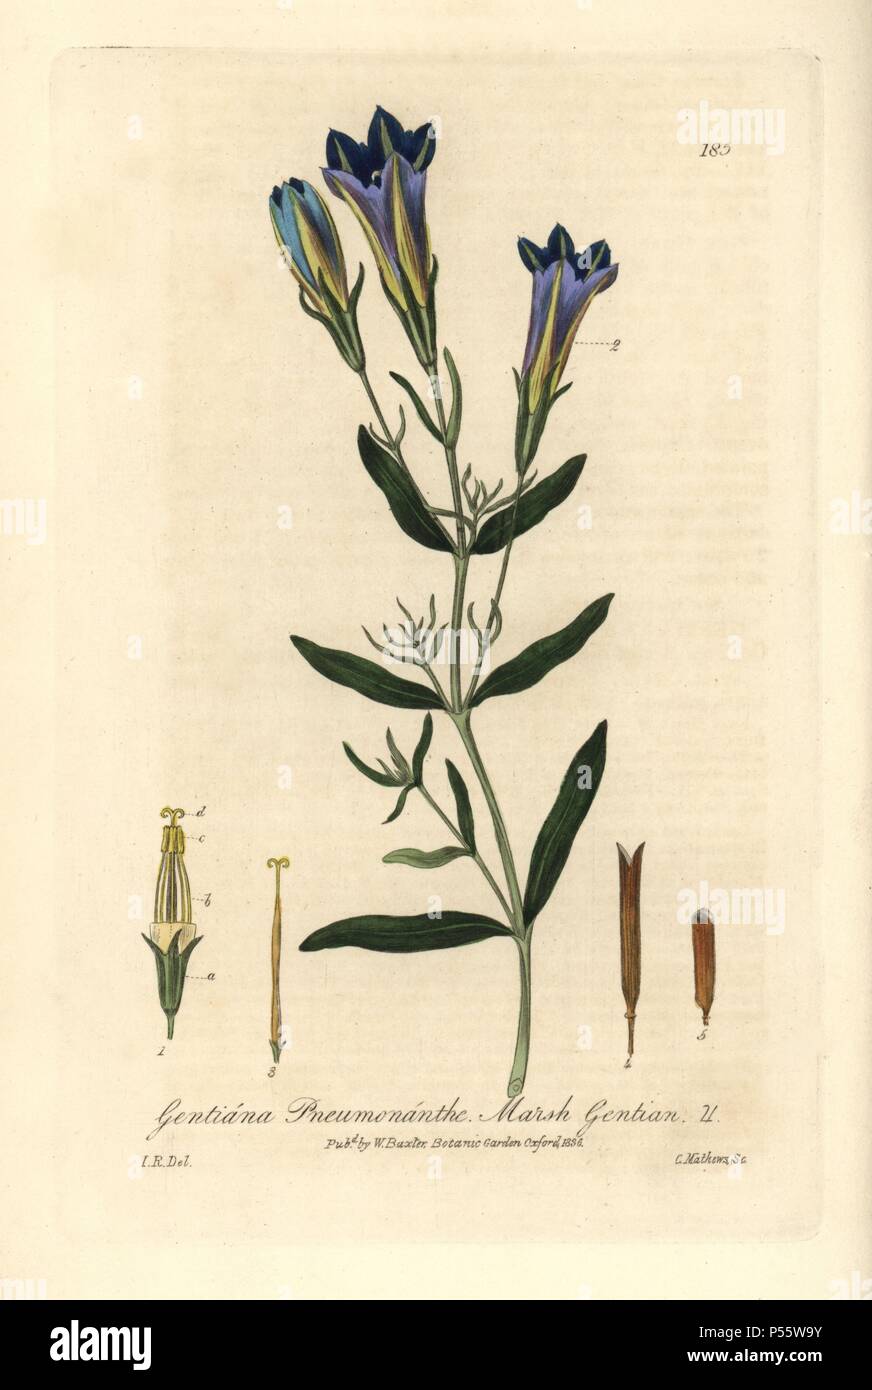 Marsh gentian, Gentiana pneumonanthe. Handcoloured copperplate engraving by Charles Mathews from a drawing by Isaac Russell from William Baxter's "British Phaenogamous Botany" 1836. Scotsman William Baxter (1788-1871) was the curator of the Oxford Botanic Garden from 1813 to 1854. Stock Photo